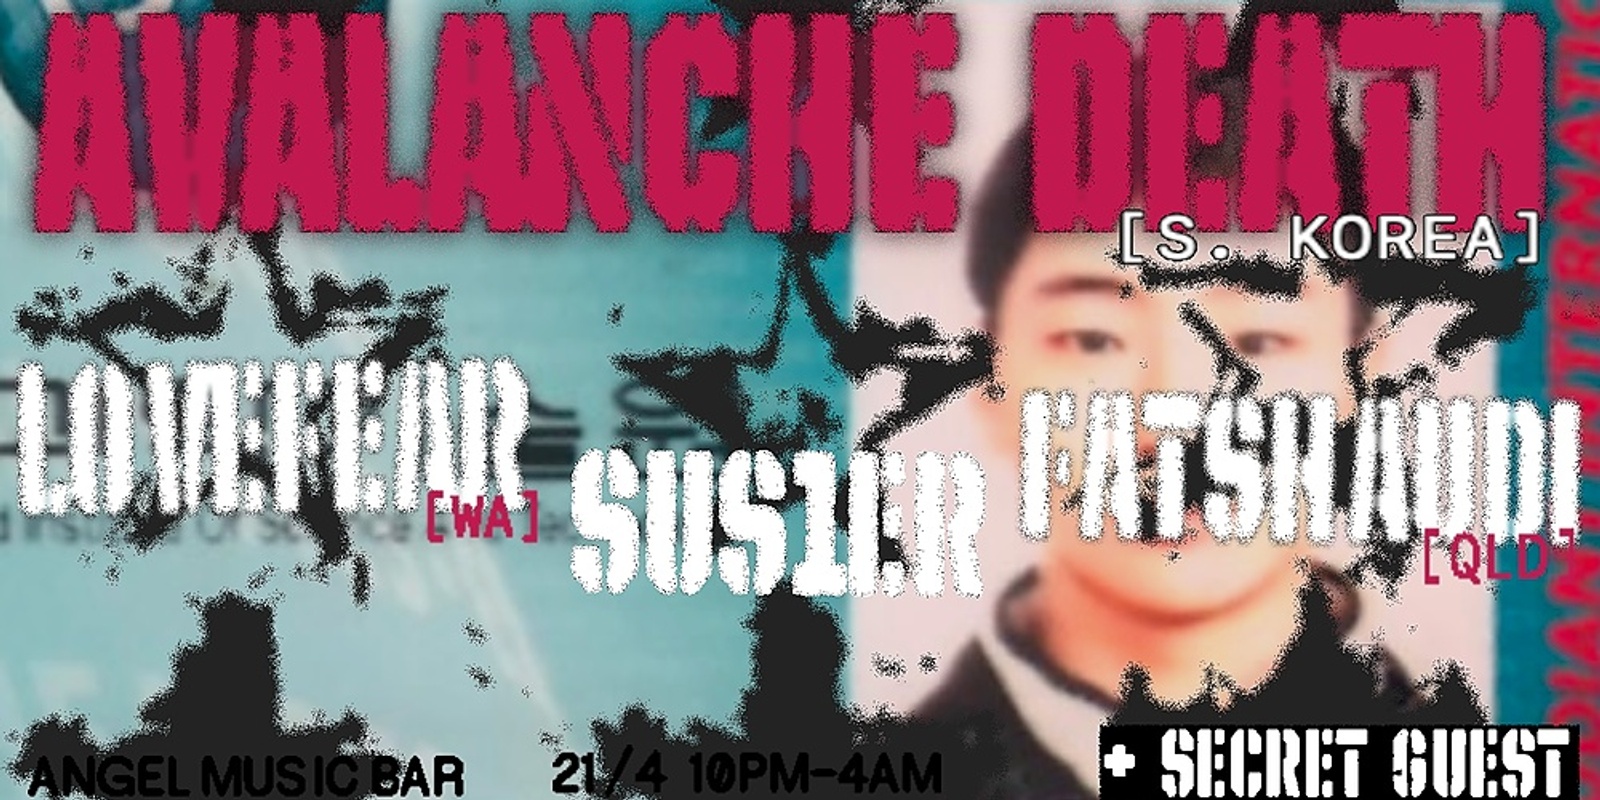 Banner image for CONTACT ONLINE PRESENTS: AVALANCHE DEATH [S.KOREA] supported by Fatshaudi [QLD], Lovefear [WA] and SUS1ER